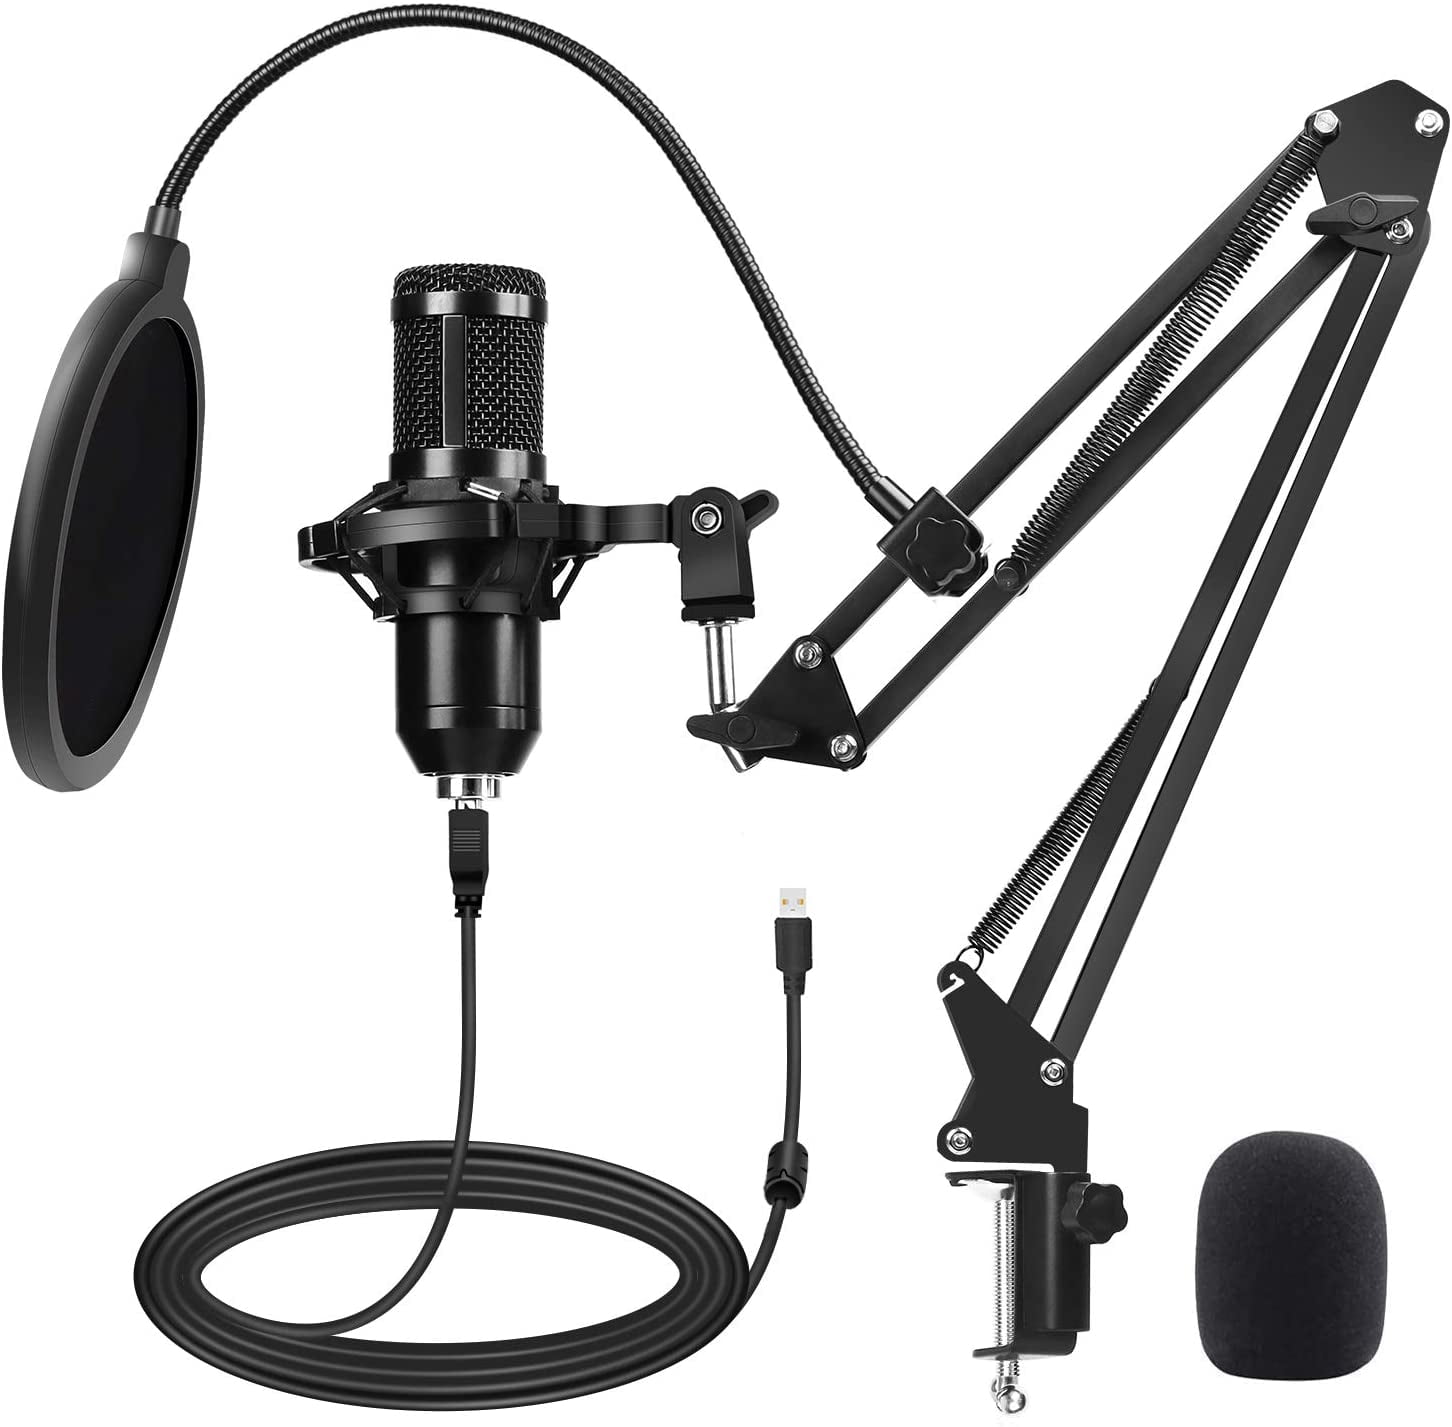 Cardioid Computer Condenser Microphone Studio Practical USB Microphone Podcasting Streaming Recording for Gaming Come with Shock Mount